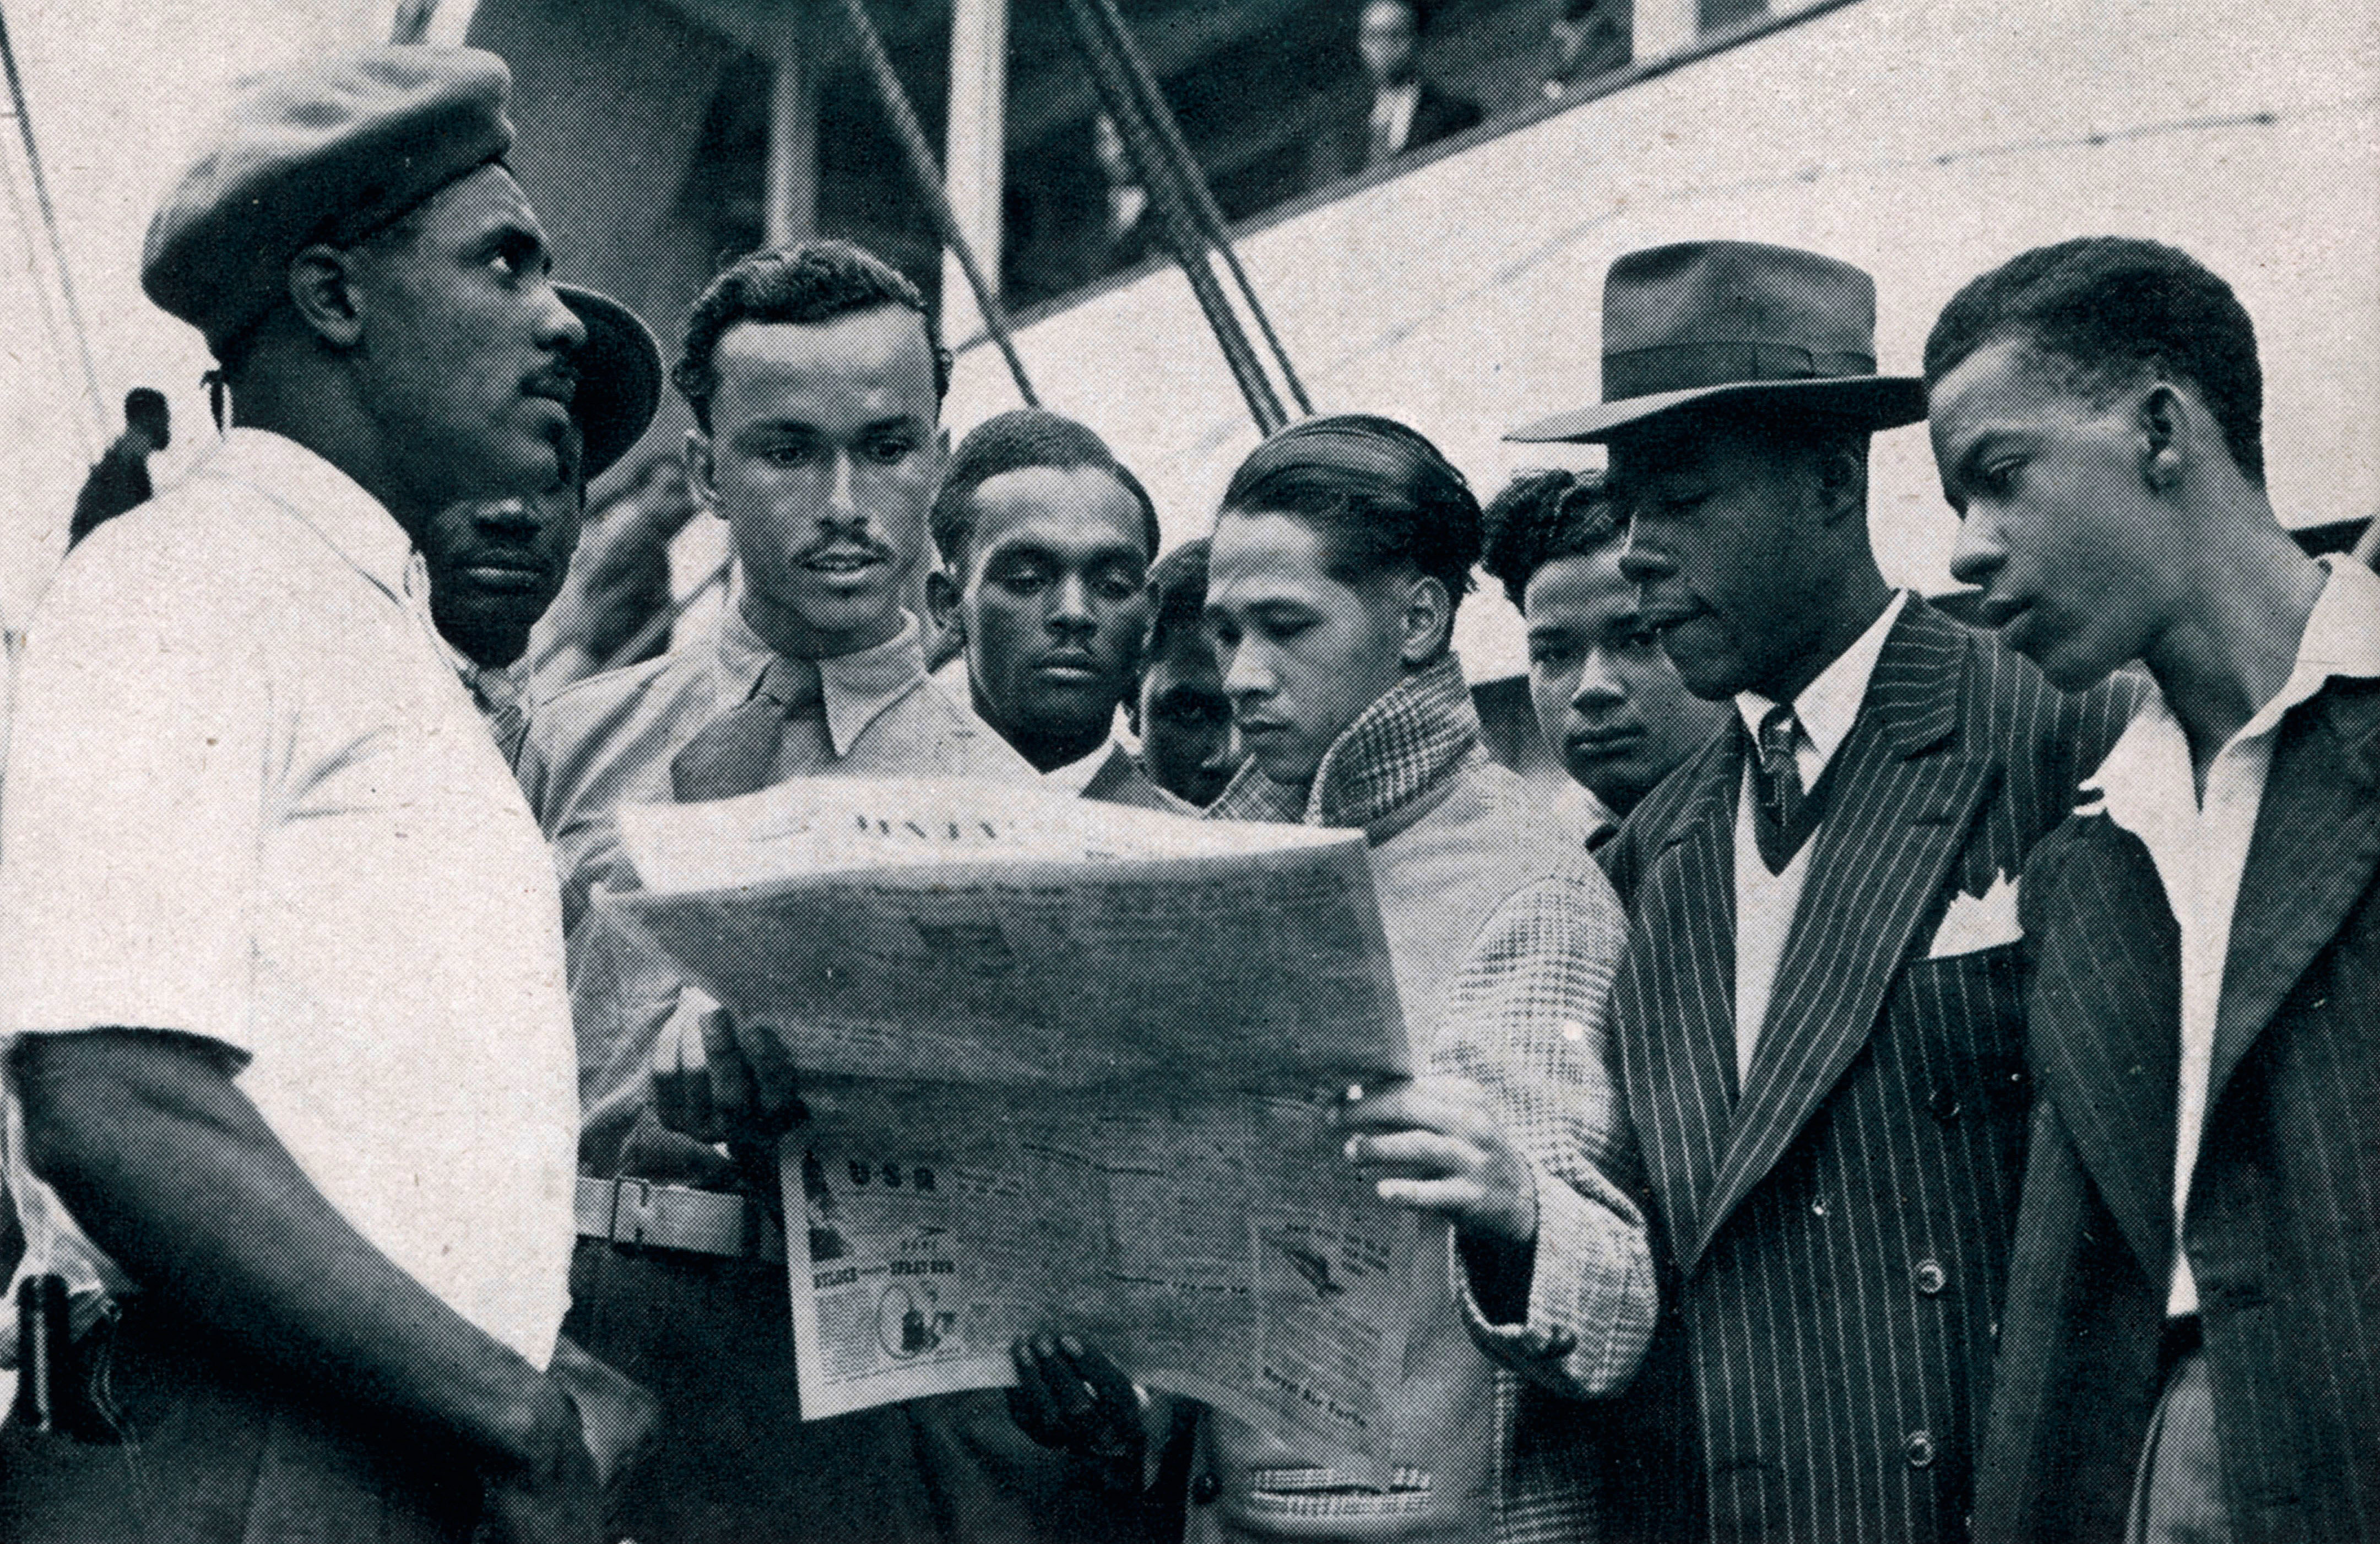 1948 Jamaicans on board the Empire Windrush copyright Illustrated London News LtdMary Evans